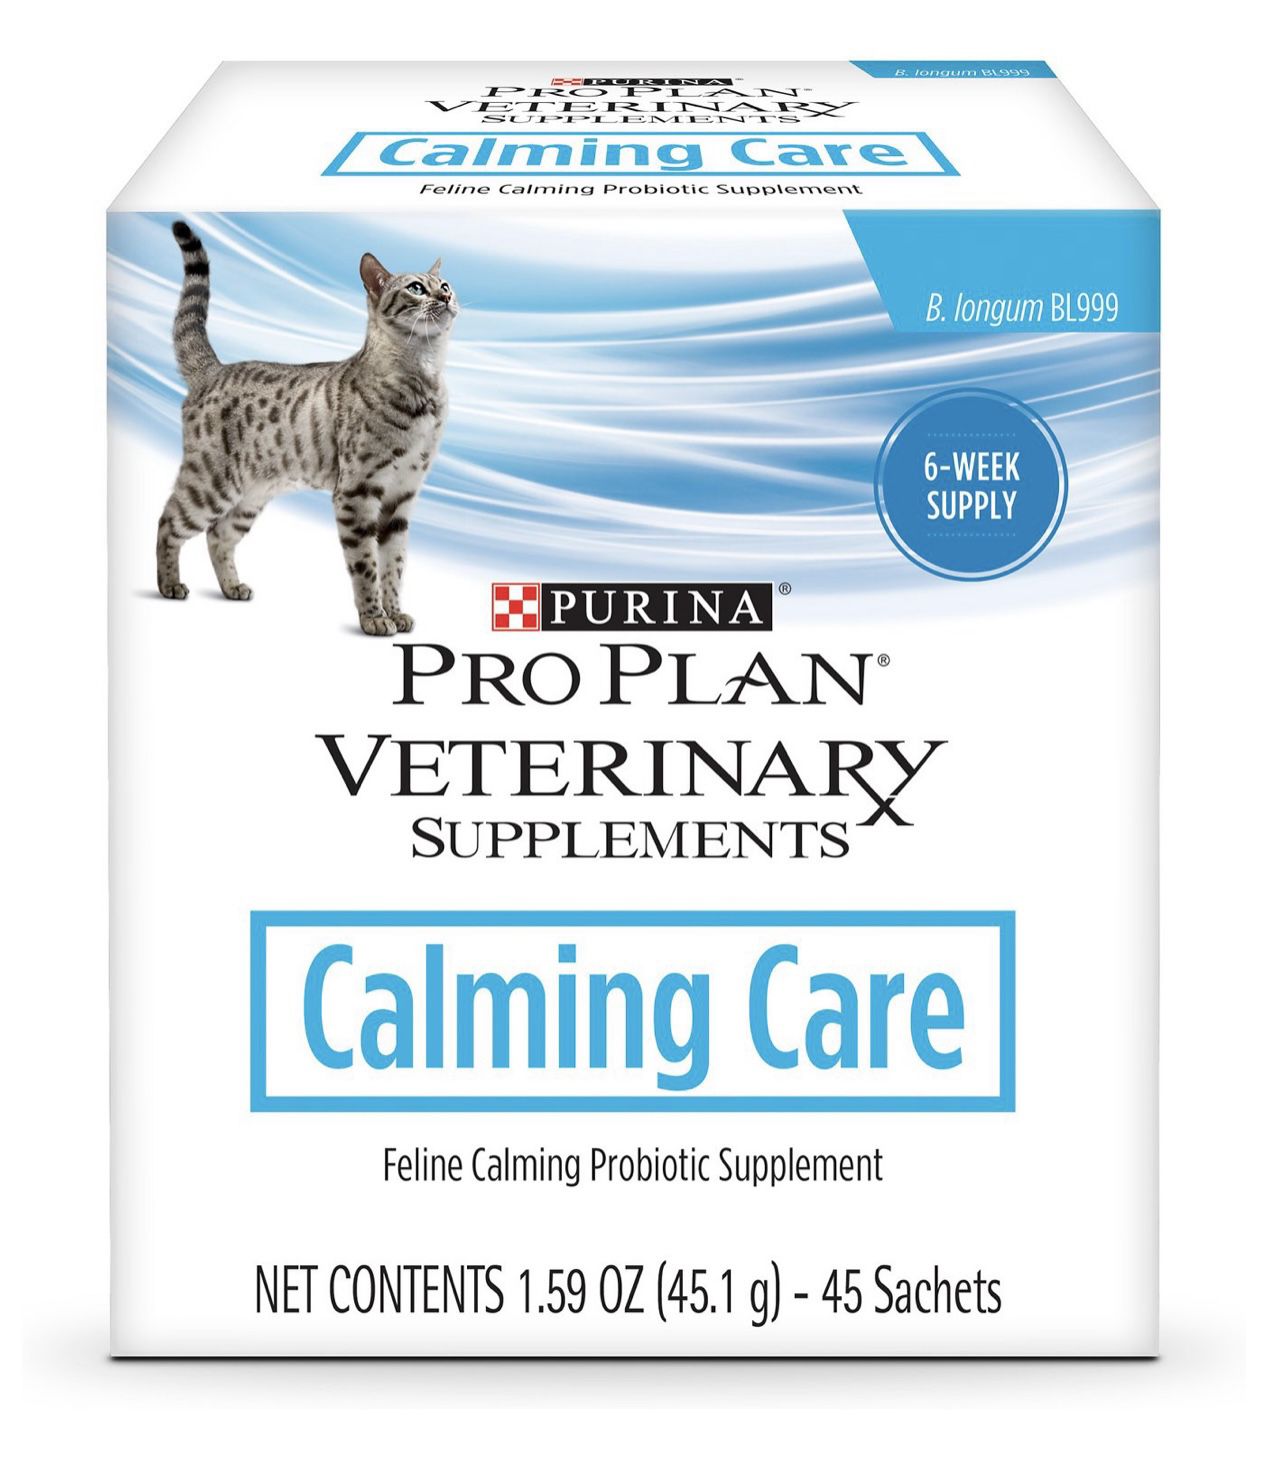 New Sealed Purina Pro Plan Veterinary Calming Care Probiotic Supplement For Cats 